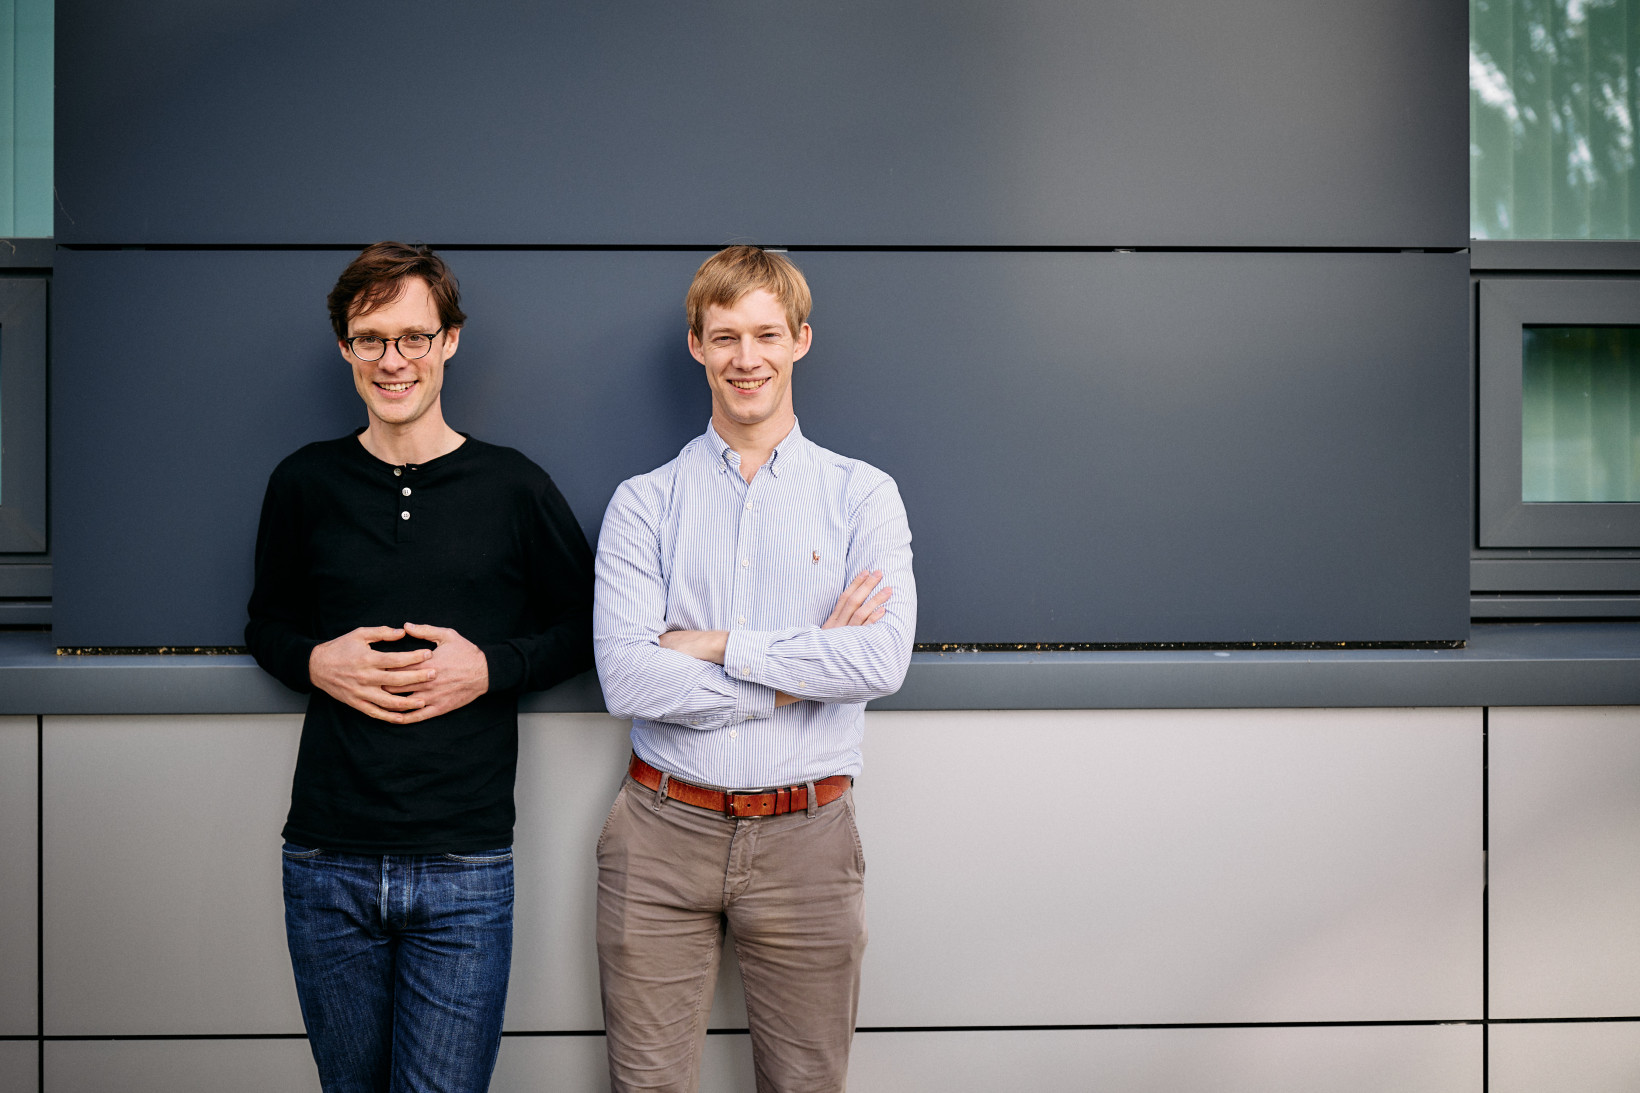 Dr Tom Harty and Dr Chris Ballance founded Oxford Ionics